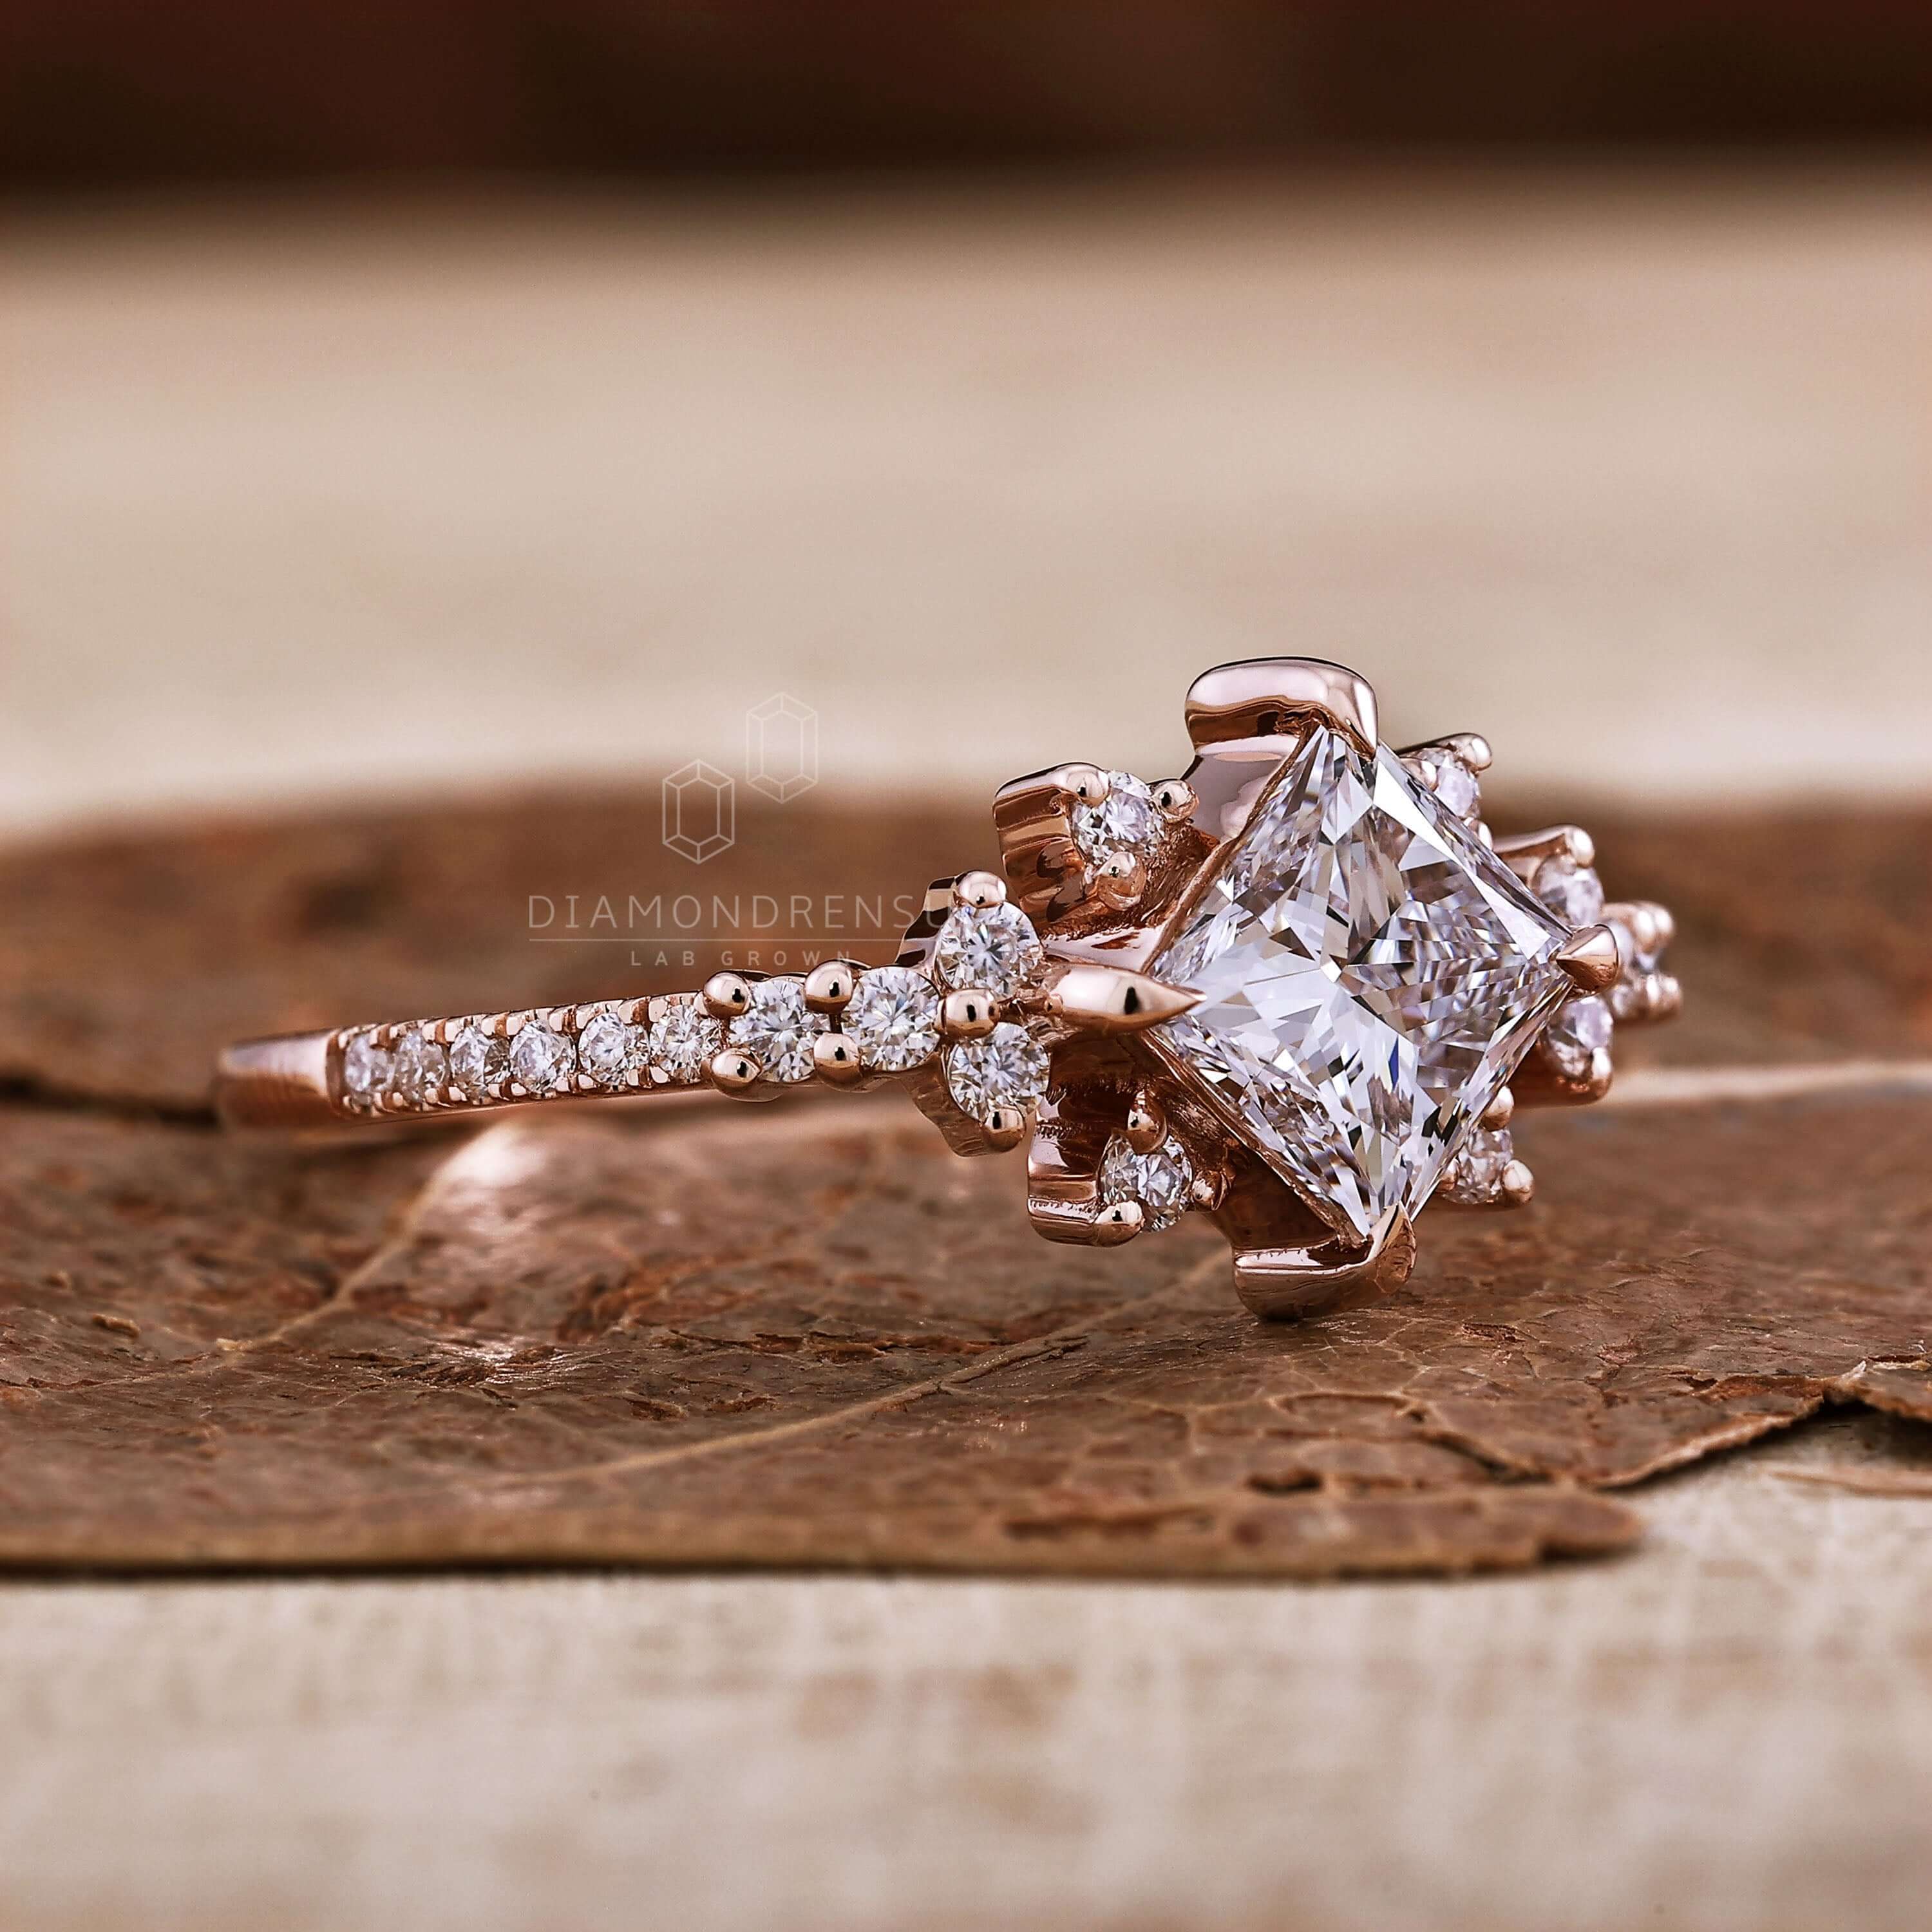 Stunning Engagement Rings for Your Big Day